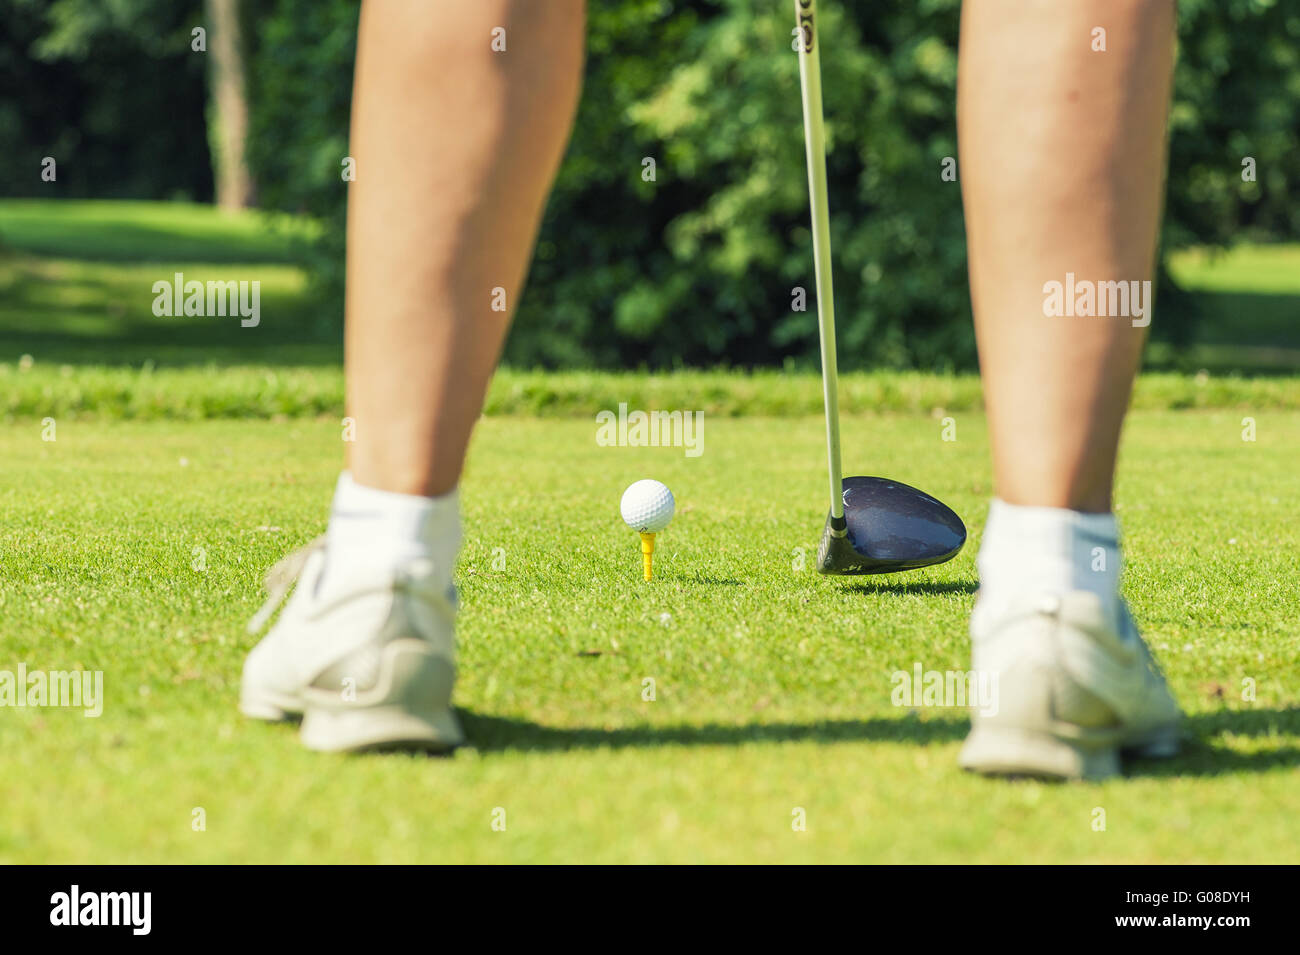 Legs of a golfer with golf ball and golf club Stock Photo